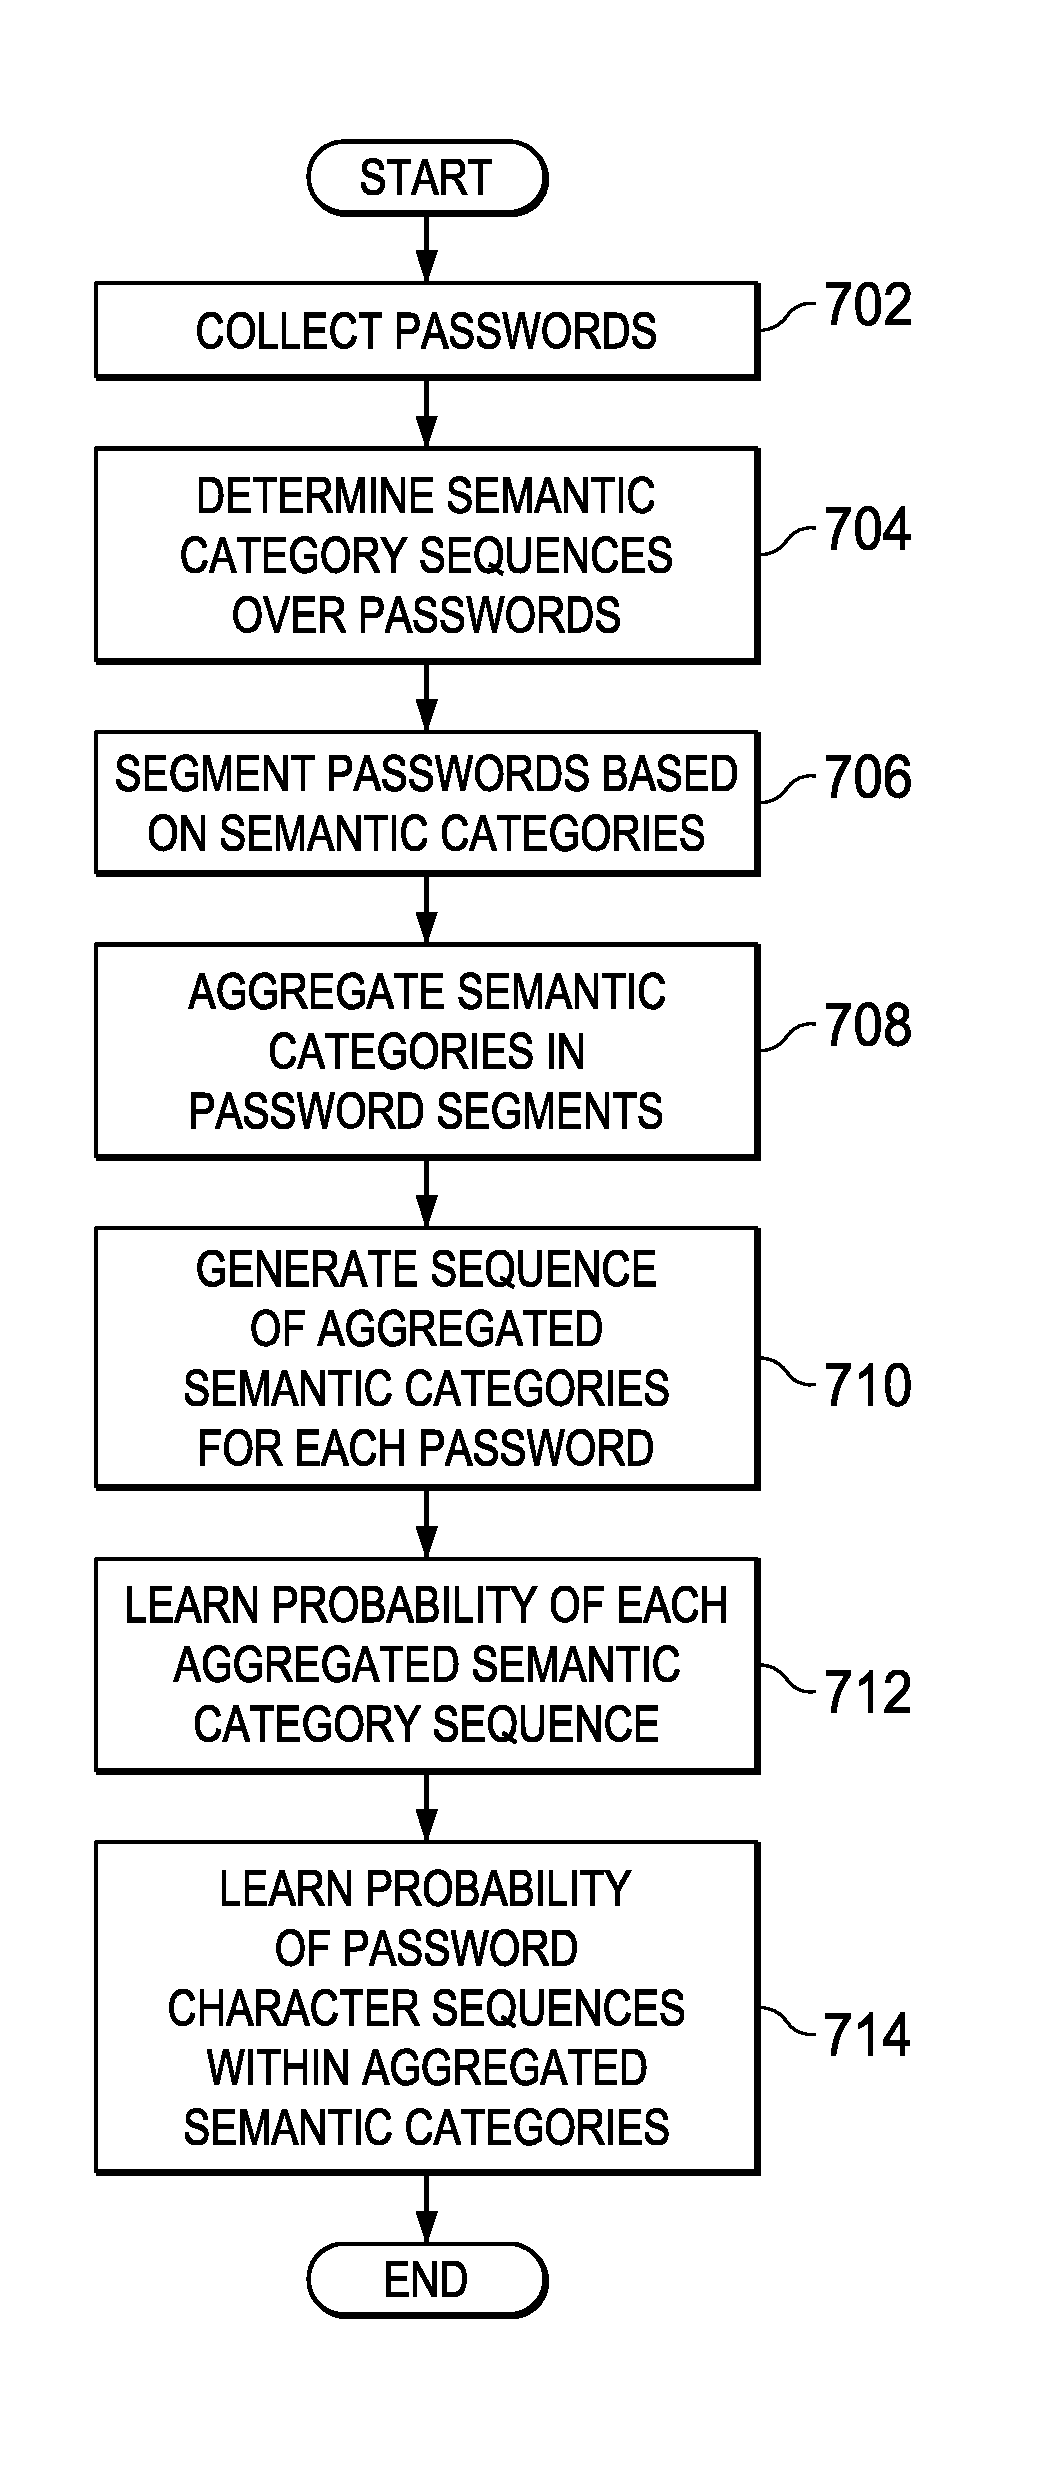 Two-Level Sequence Learning for Analyzing, Metering, Generating, and Cracking Passwords